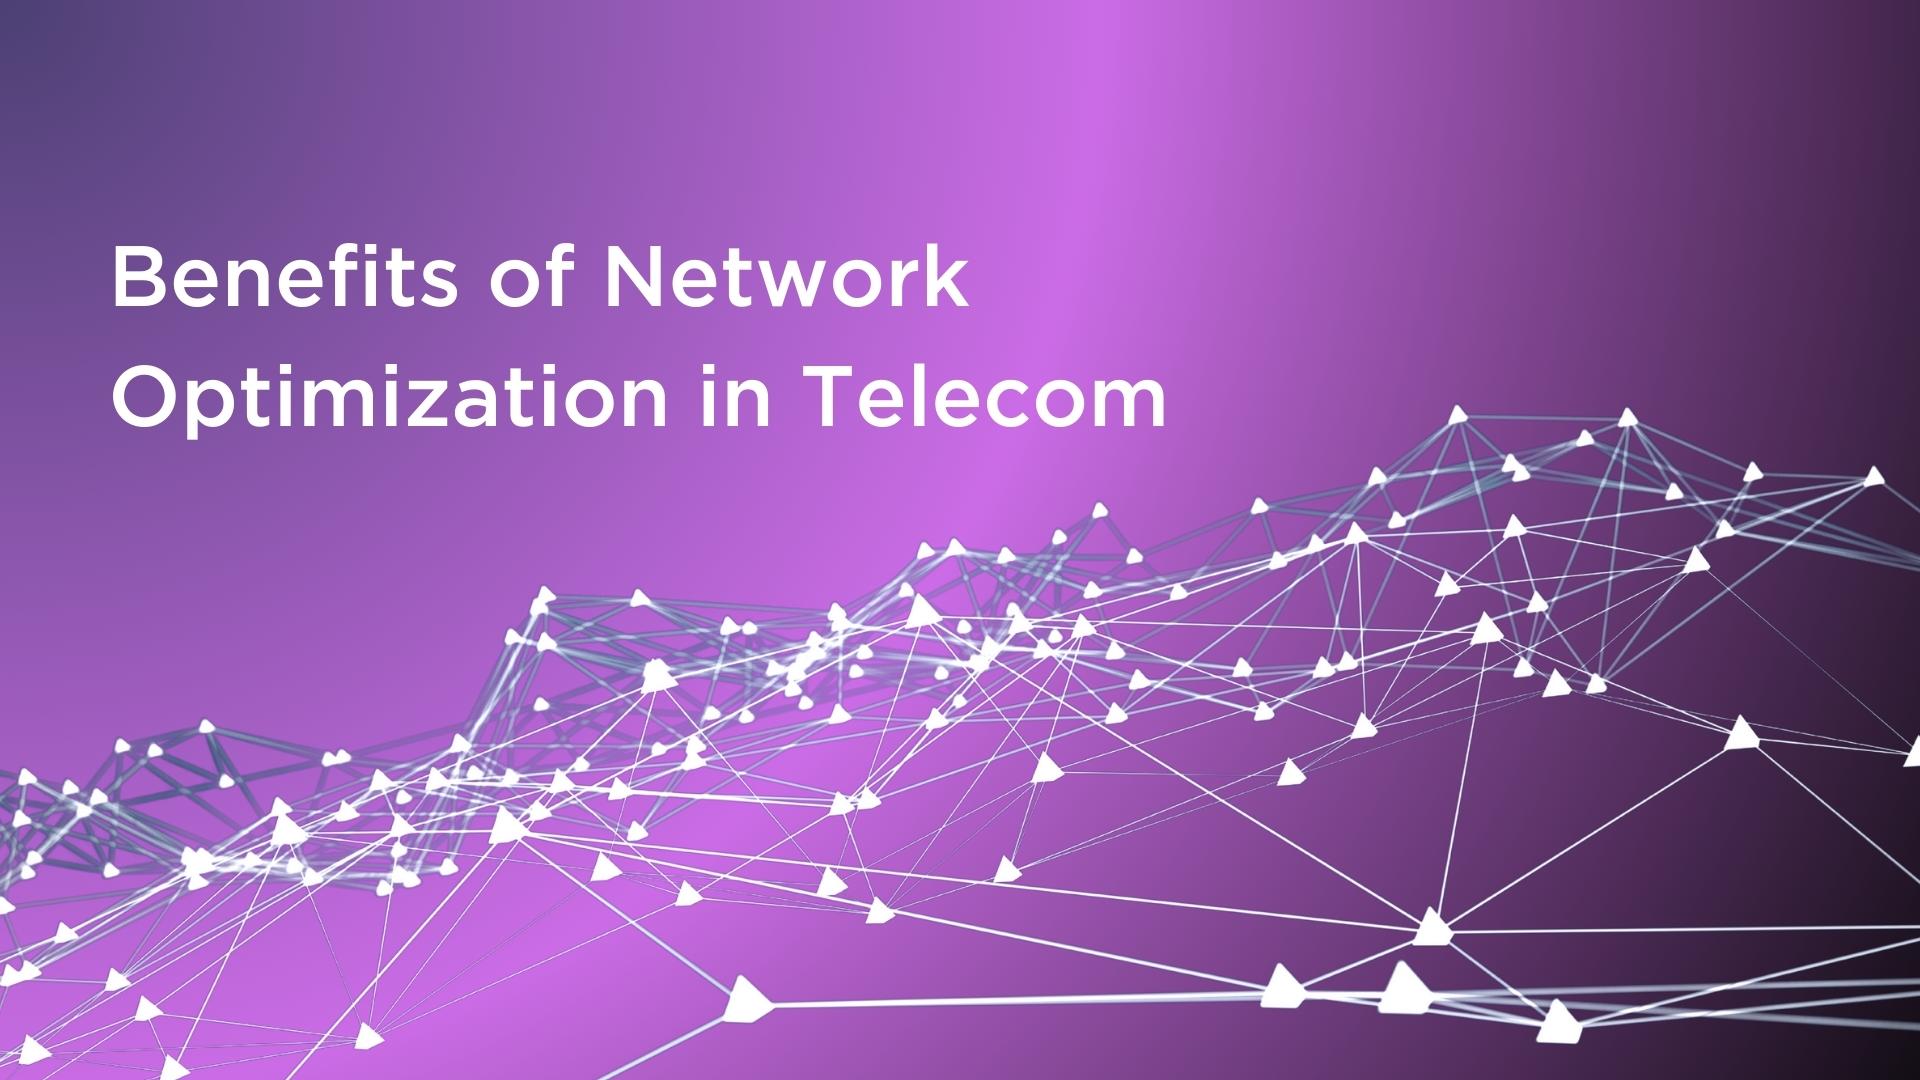 Innovile-telecommunication-solutions-smart-services-what-is-network Optimization-in-telecom-benefits